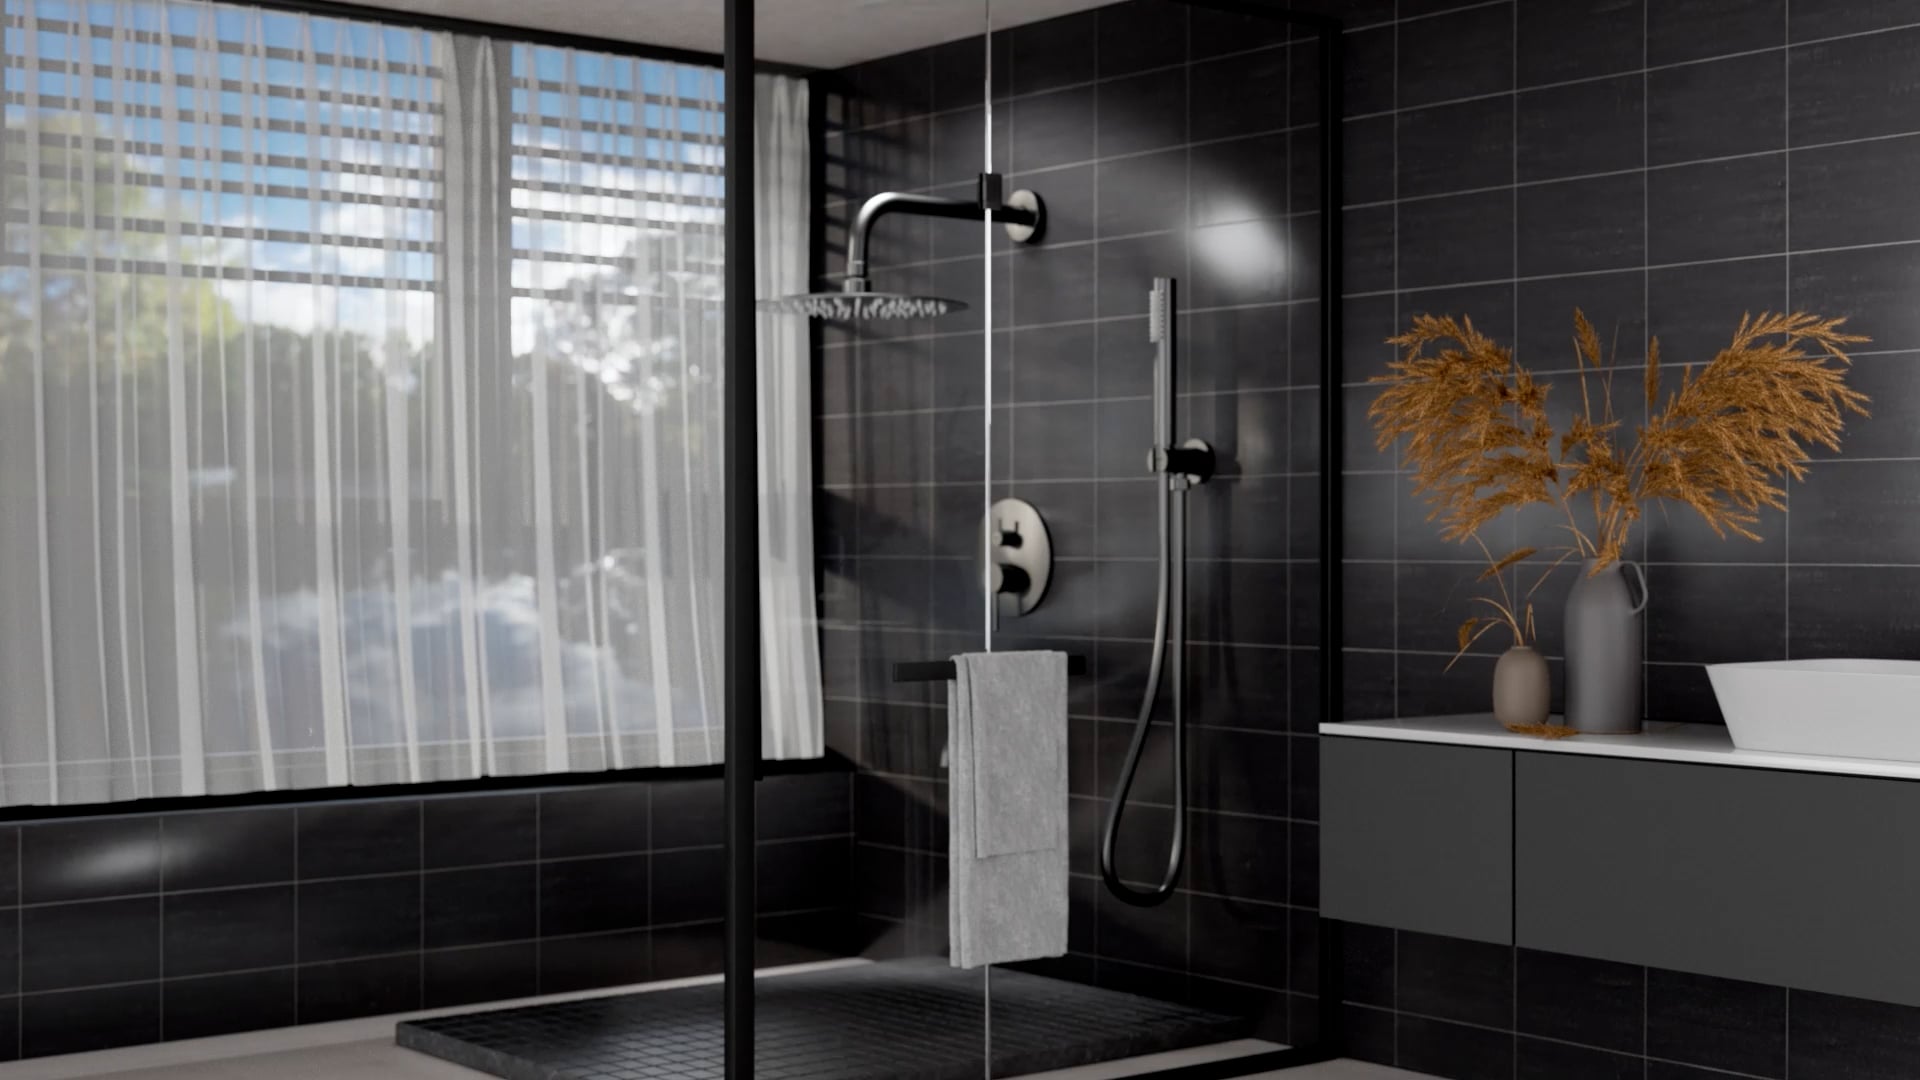 10" Wall Mount Rainfall Shower Head Tub And Shower Faucet with Rough-in Valve, Matte Black